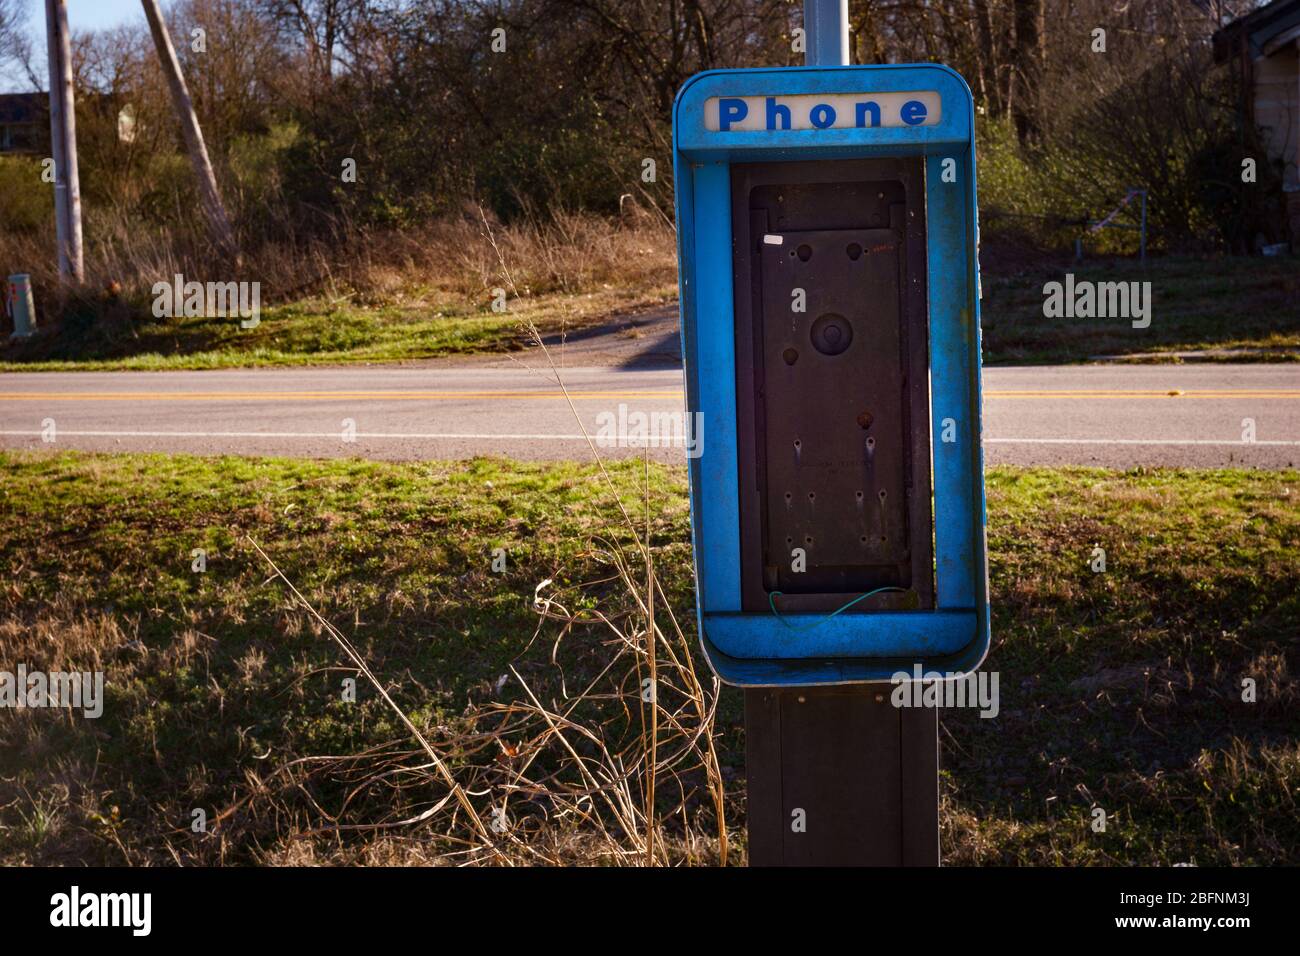 An old and damaged non working pay phone booth in rural Arkansas,Nov 2015. Stock Photo